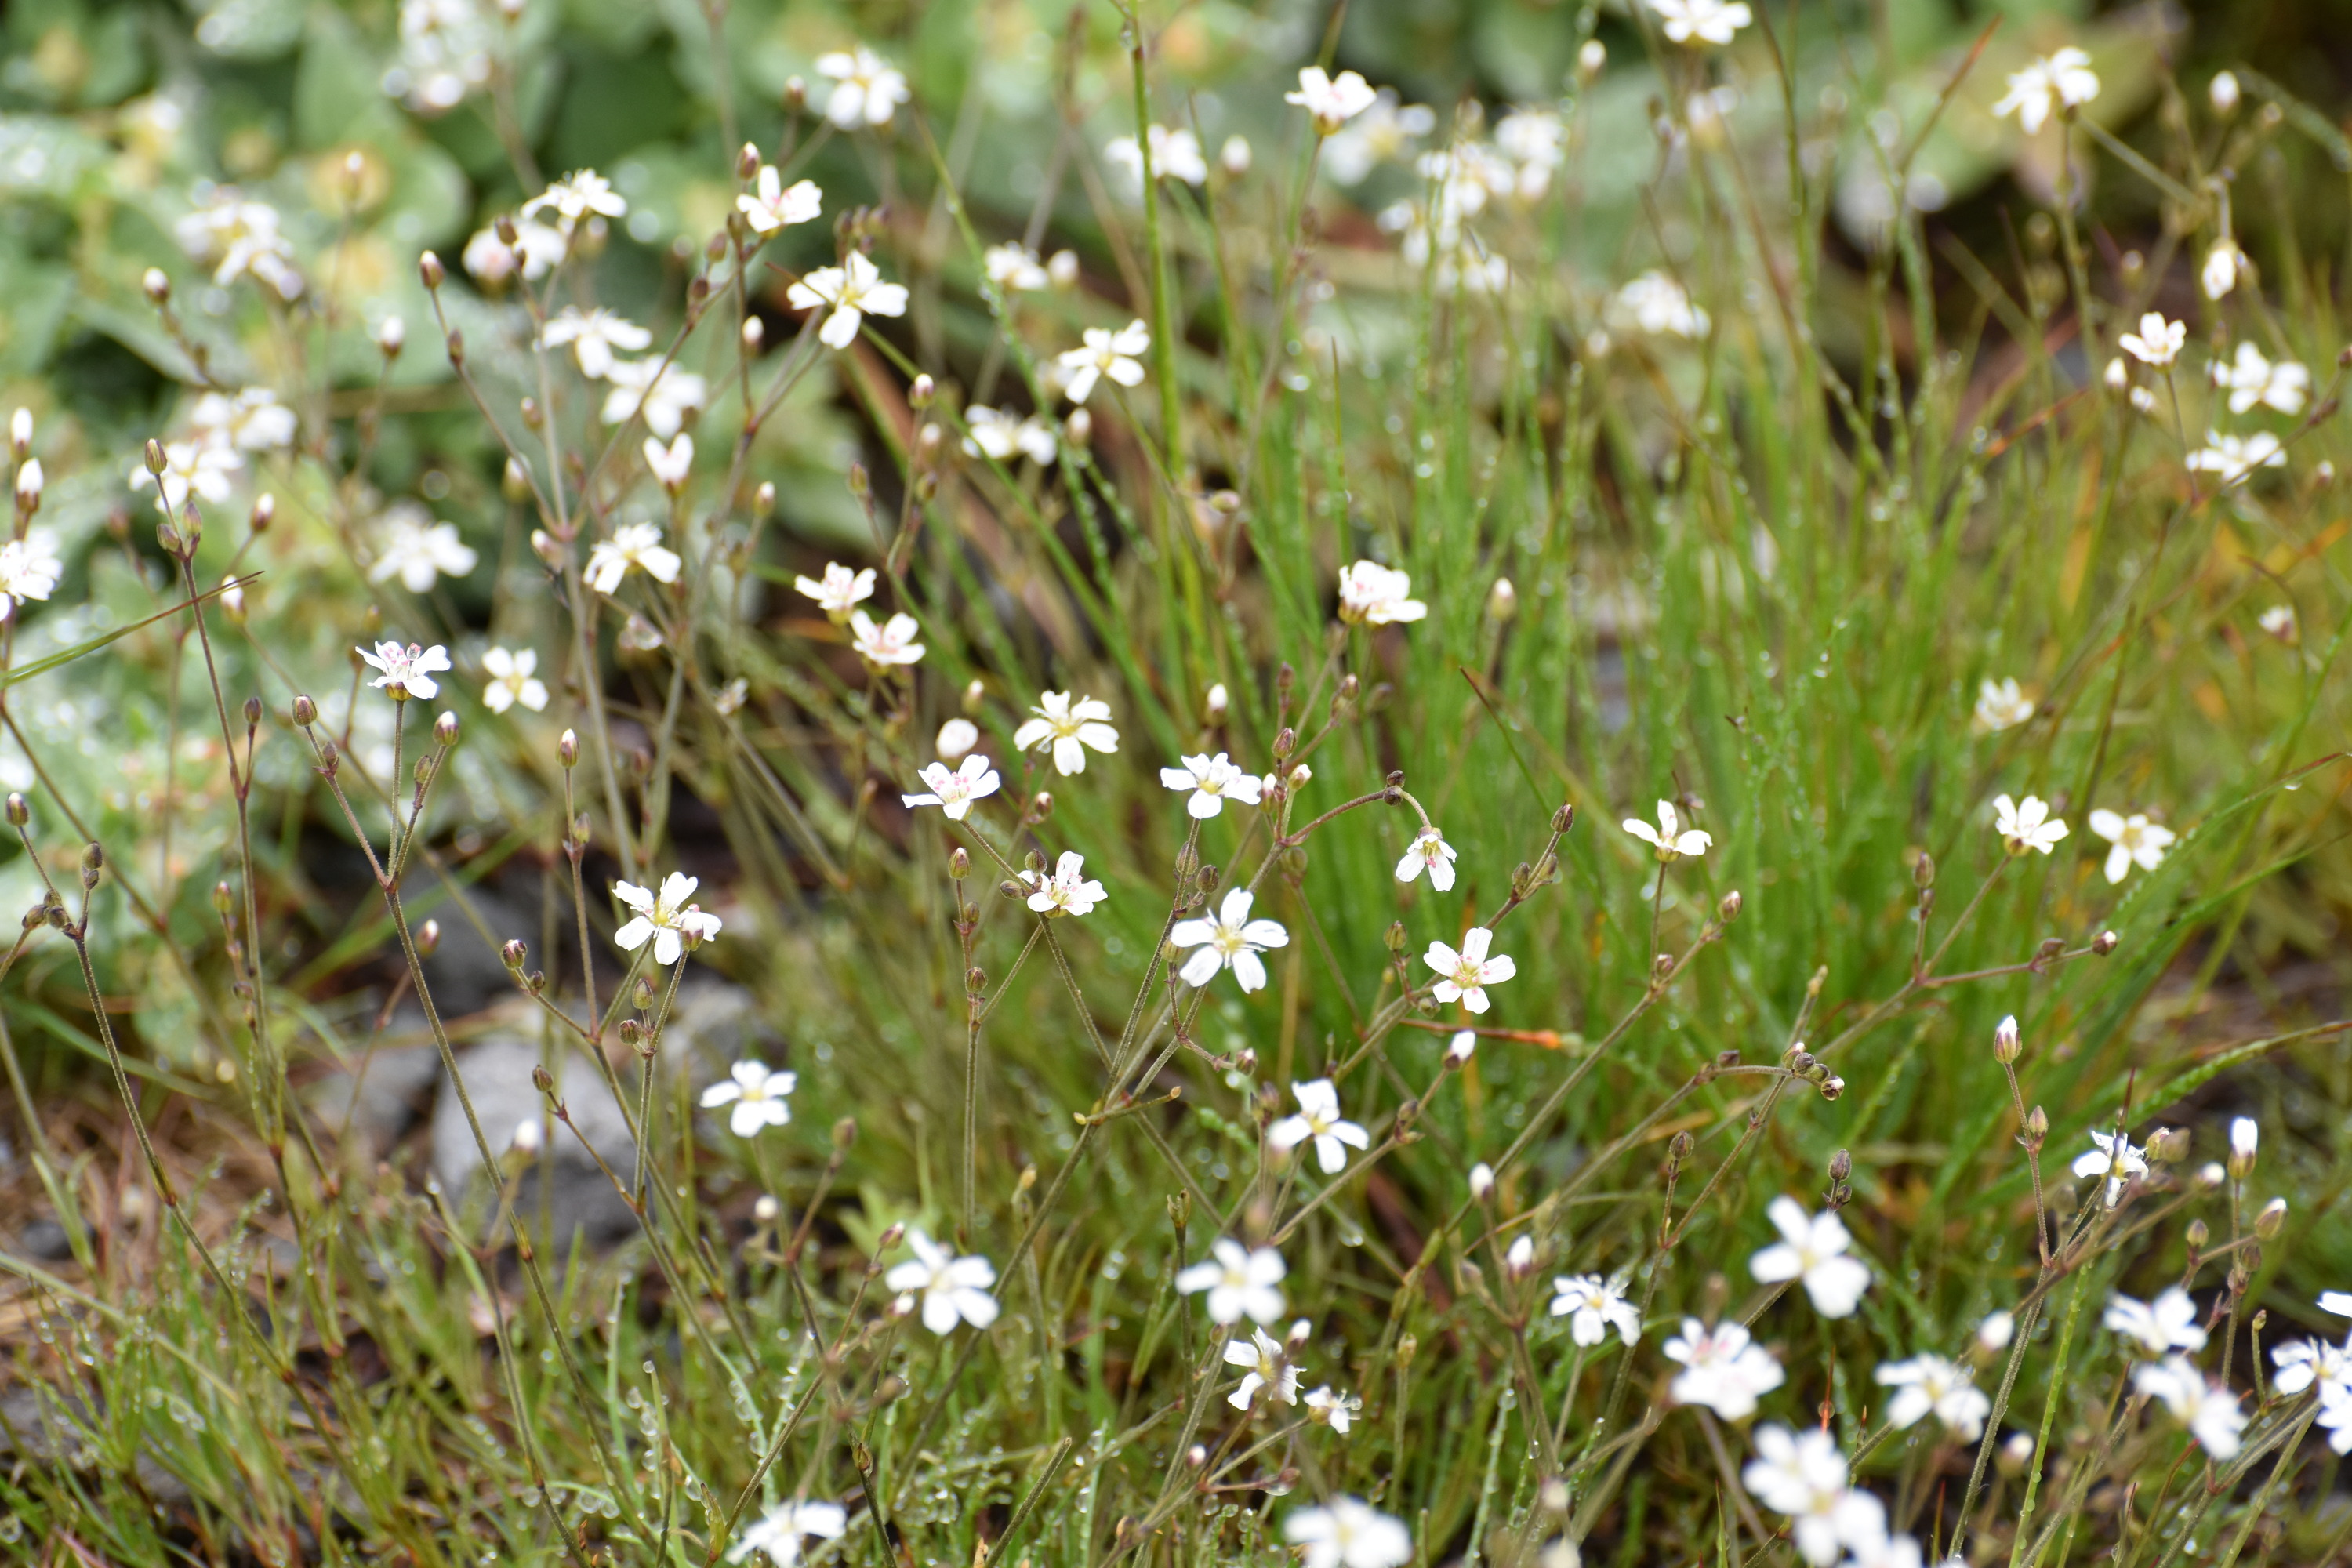 A patch of wildflowers with thread-like leaves and delicate white five-petaled blooms. 